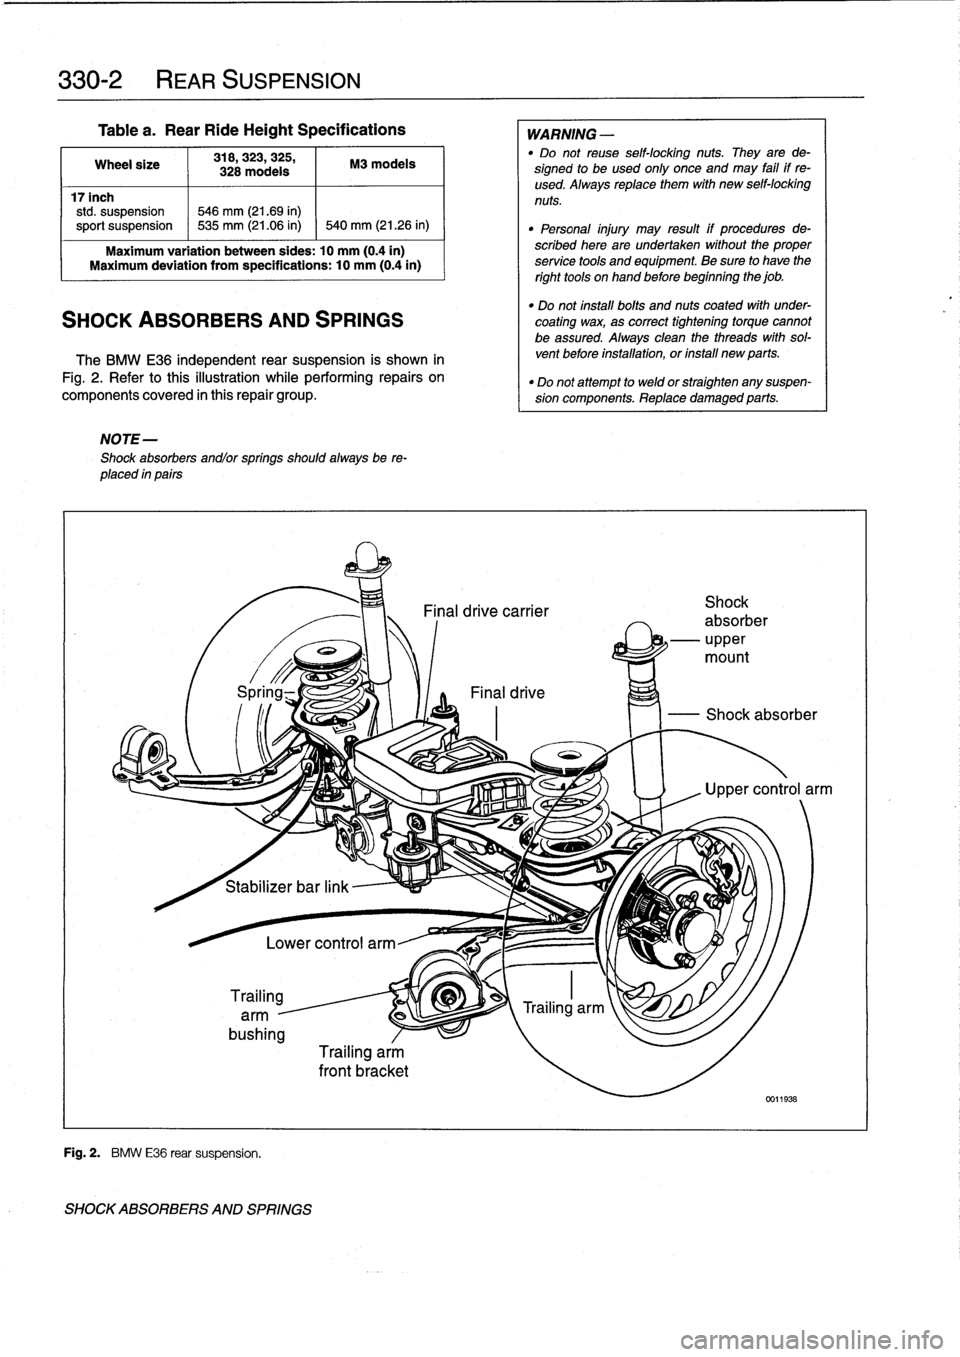 BMW M3 1996 E36 User Guide 
330-2

	

REAR
SUSPENSION

Table
a
.
Rear
RideHeight
Specifications

Wheel
size

	

318,323,
325,

	

M3
modeis
328
modeis

17inch
std
.
suspension

	

546
mm
(21.69
in)
sport
suspension

	

~
535
mm